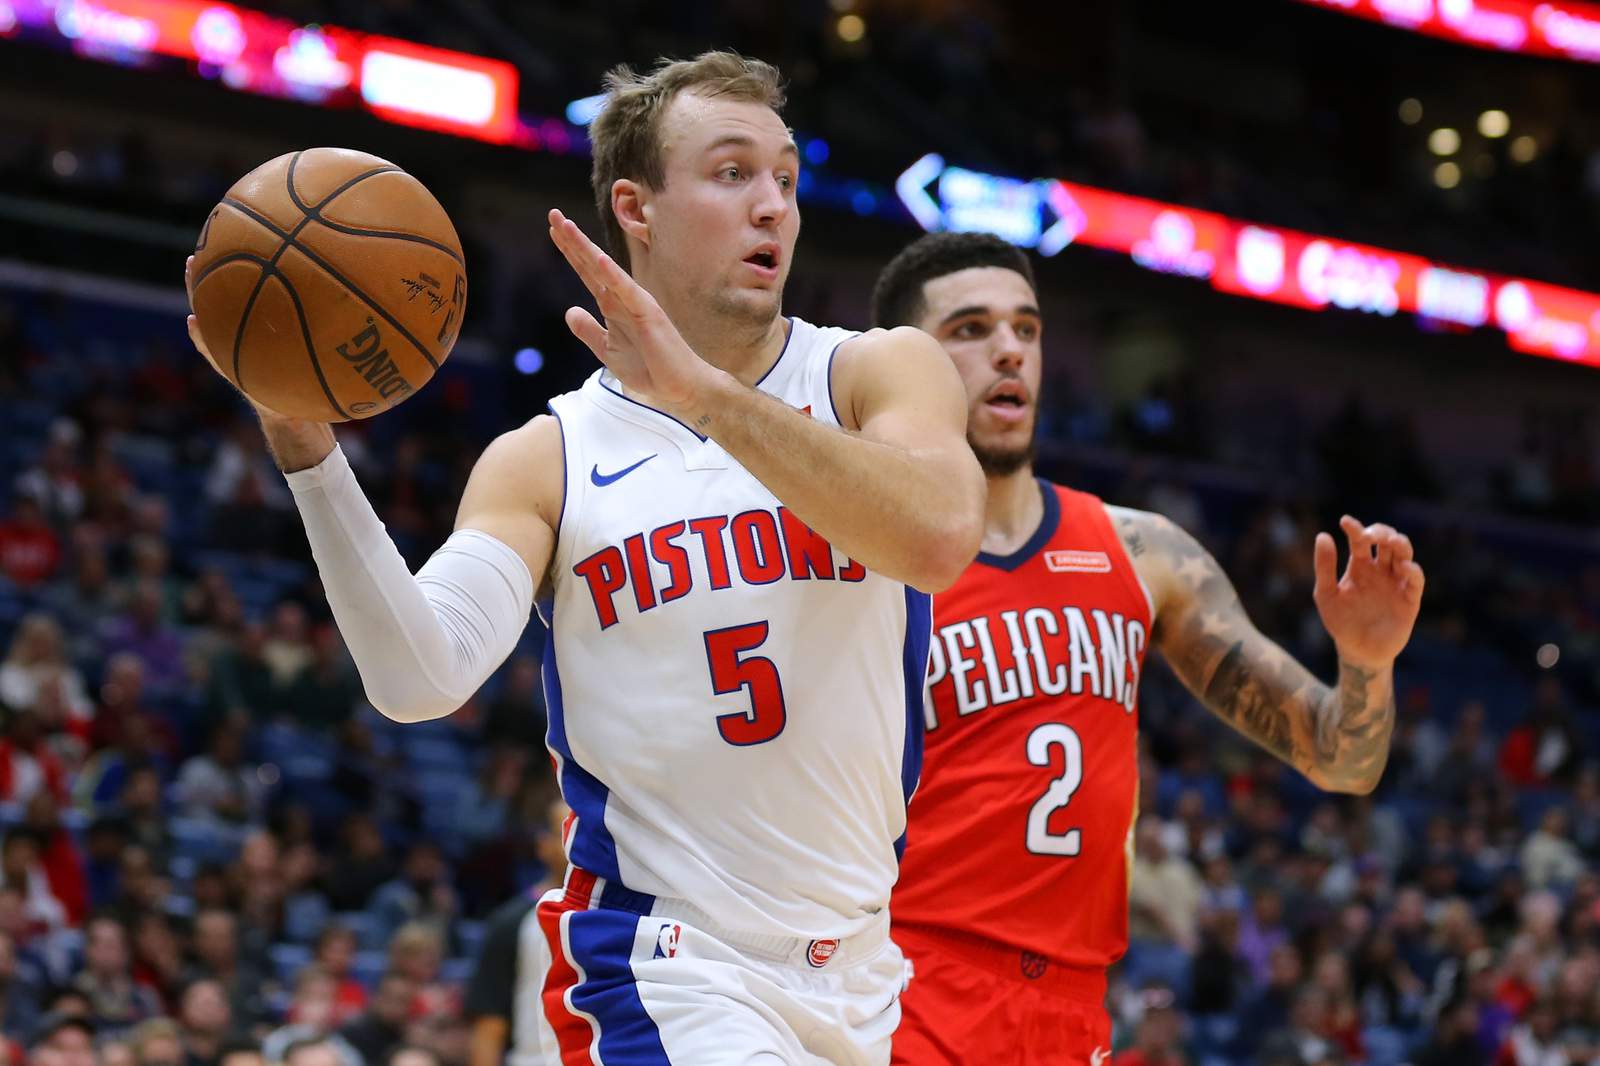 NBA Draft 2020: Pistons trade Luke Kennard to Clippers for No. 19 pick